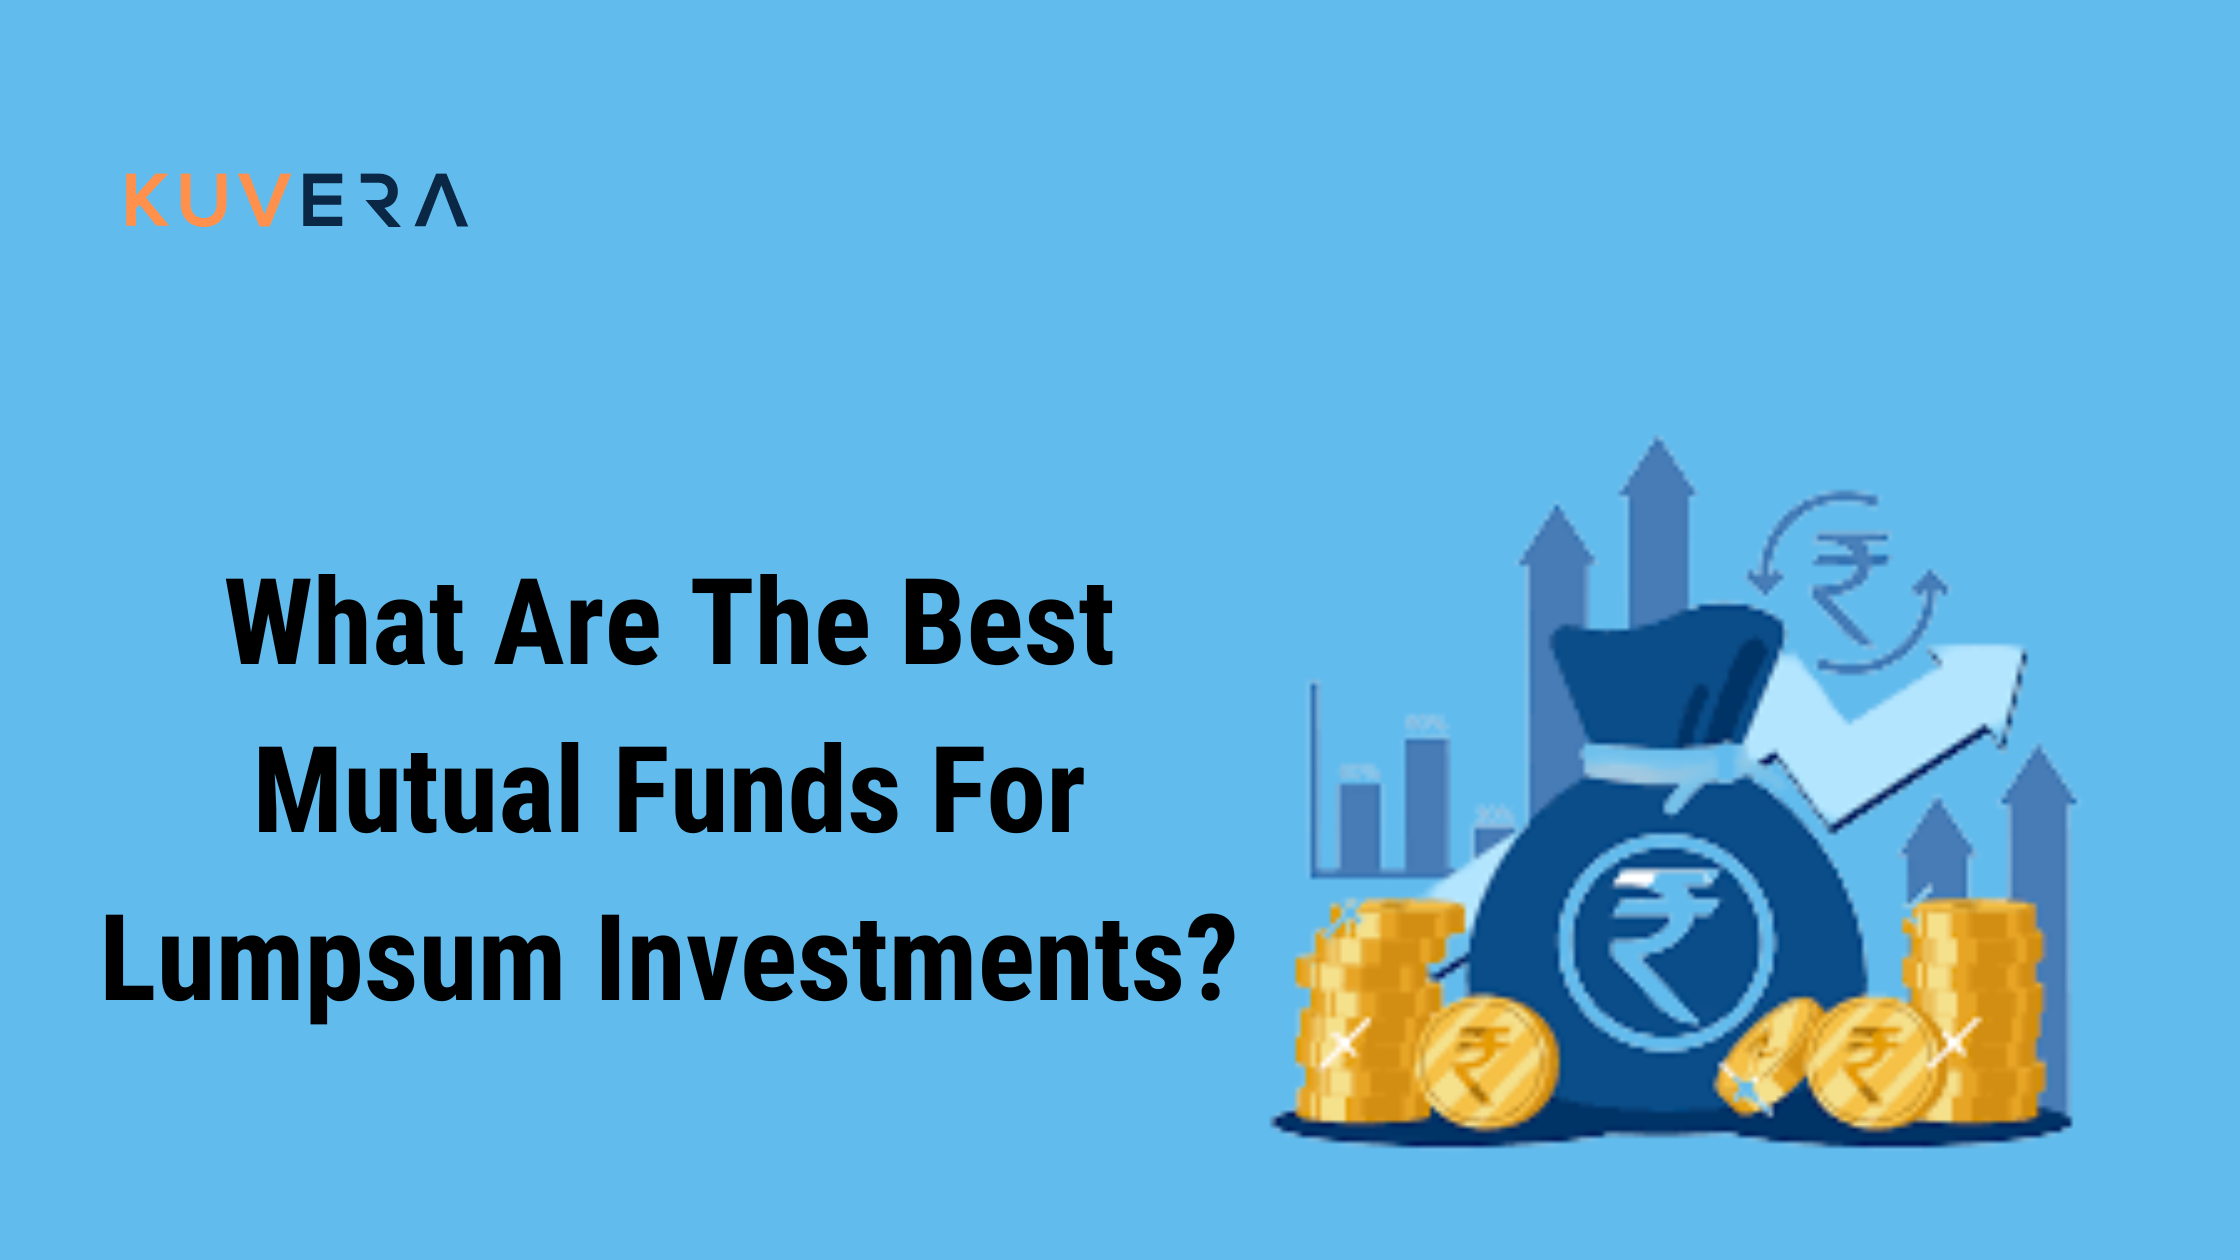 What Are The Best Mutual Funds For Lumpsum Investments?